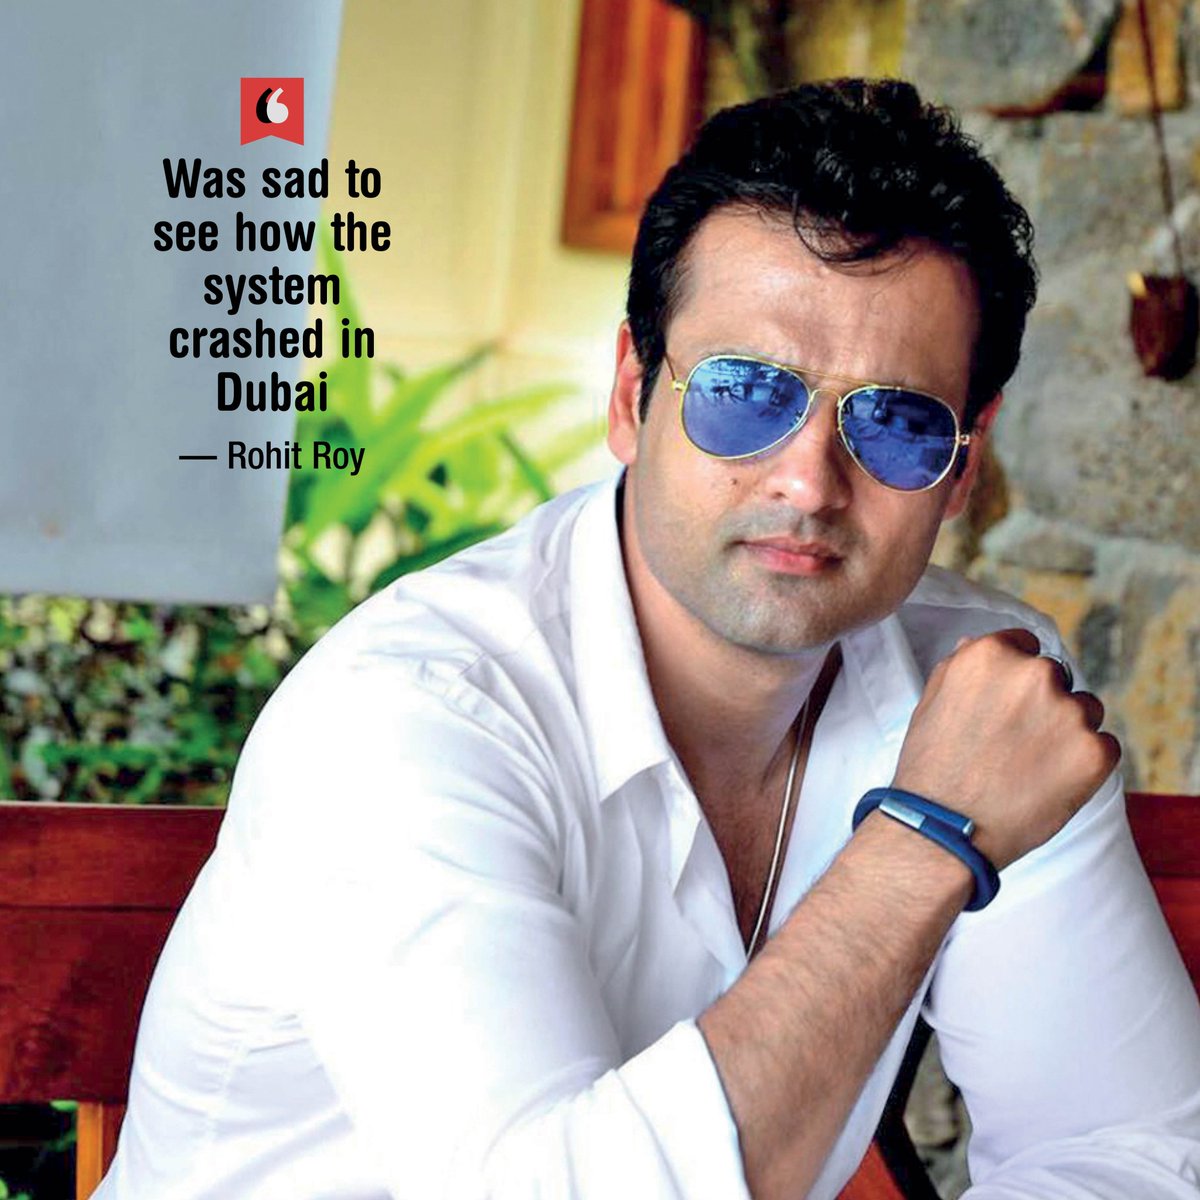 #RohitRoy on how even after heavy rains in #Dubai, and people stuck on the roads, everything came under control within 24 hours @rohitroy500 #DubaiFlooding #DubaiRains Read: shorturl.at/mqwY4